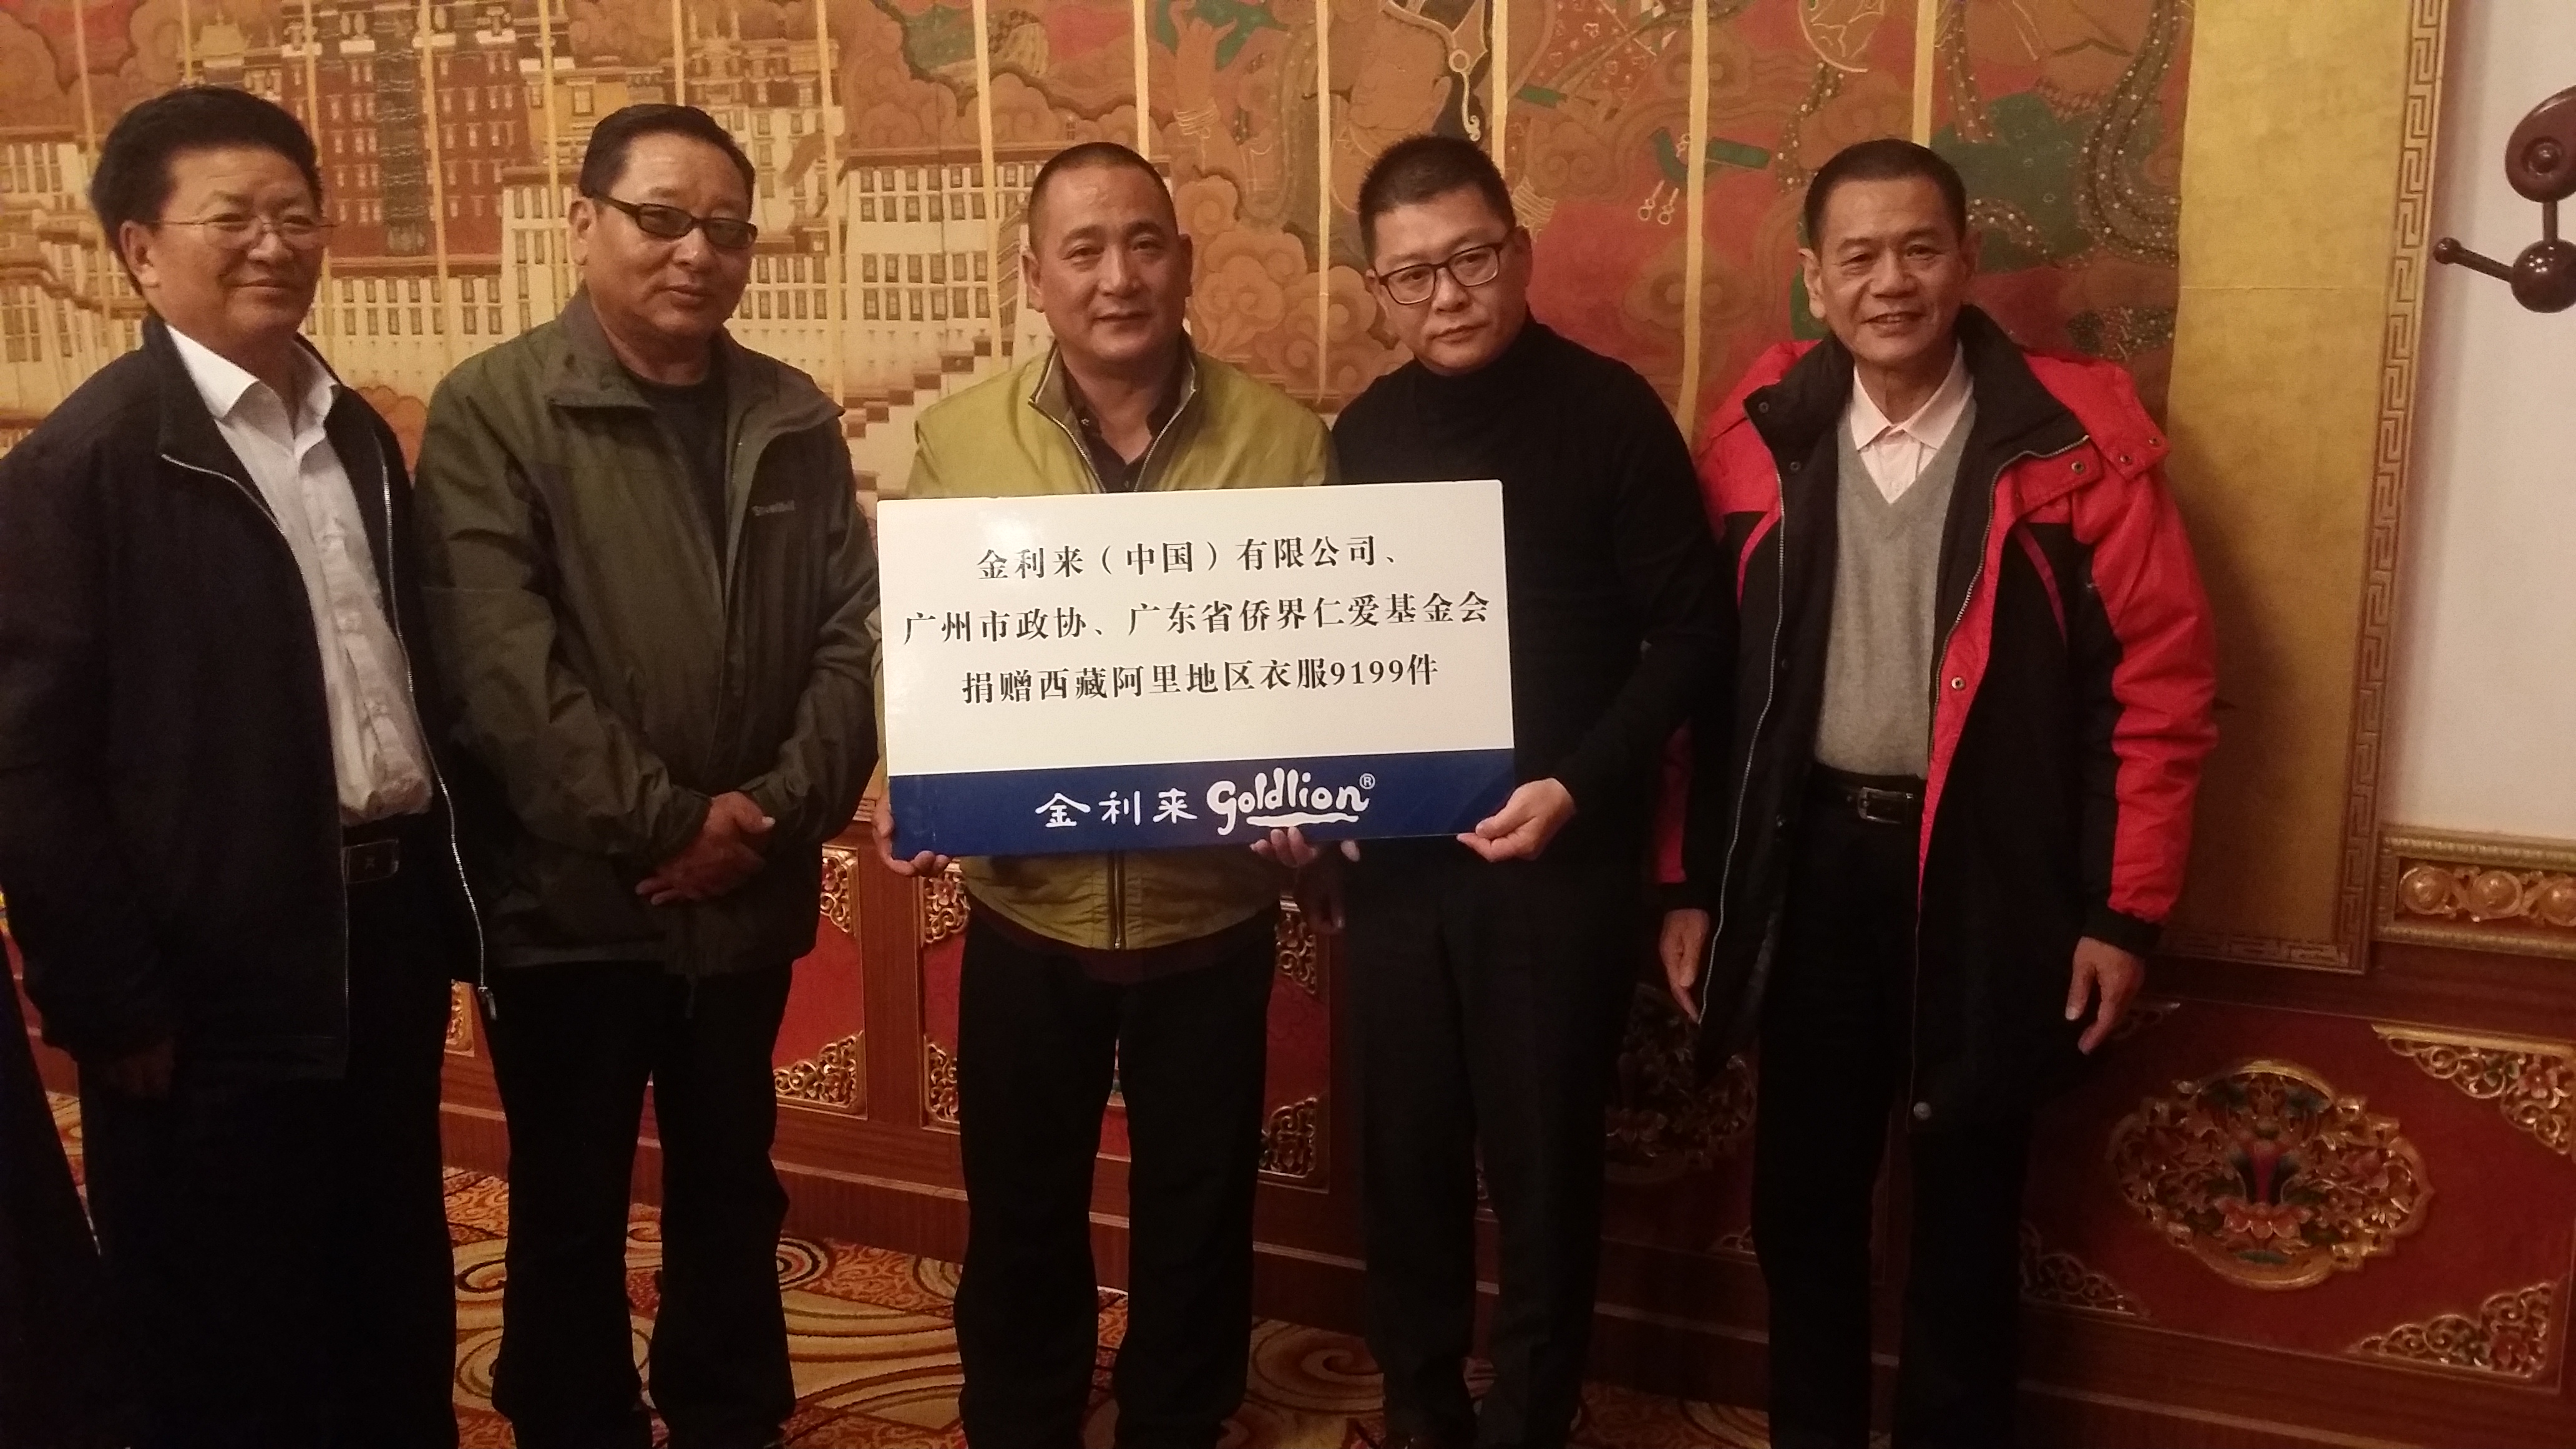 On 2 October, 2014, the CPPCC in Tibet Autonomous Region accepted the donation by Goldlion to Ngari.